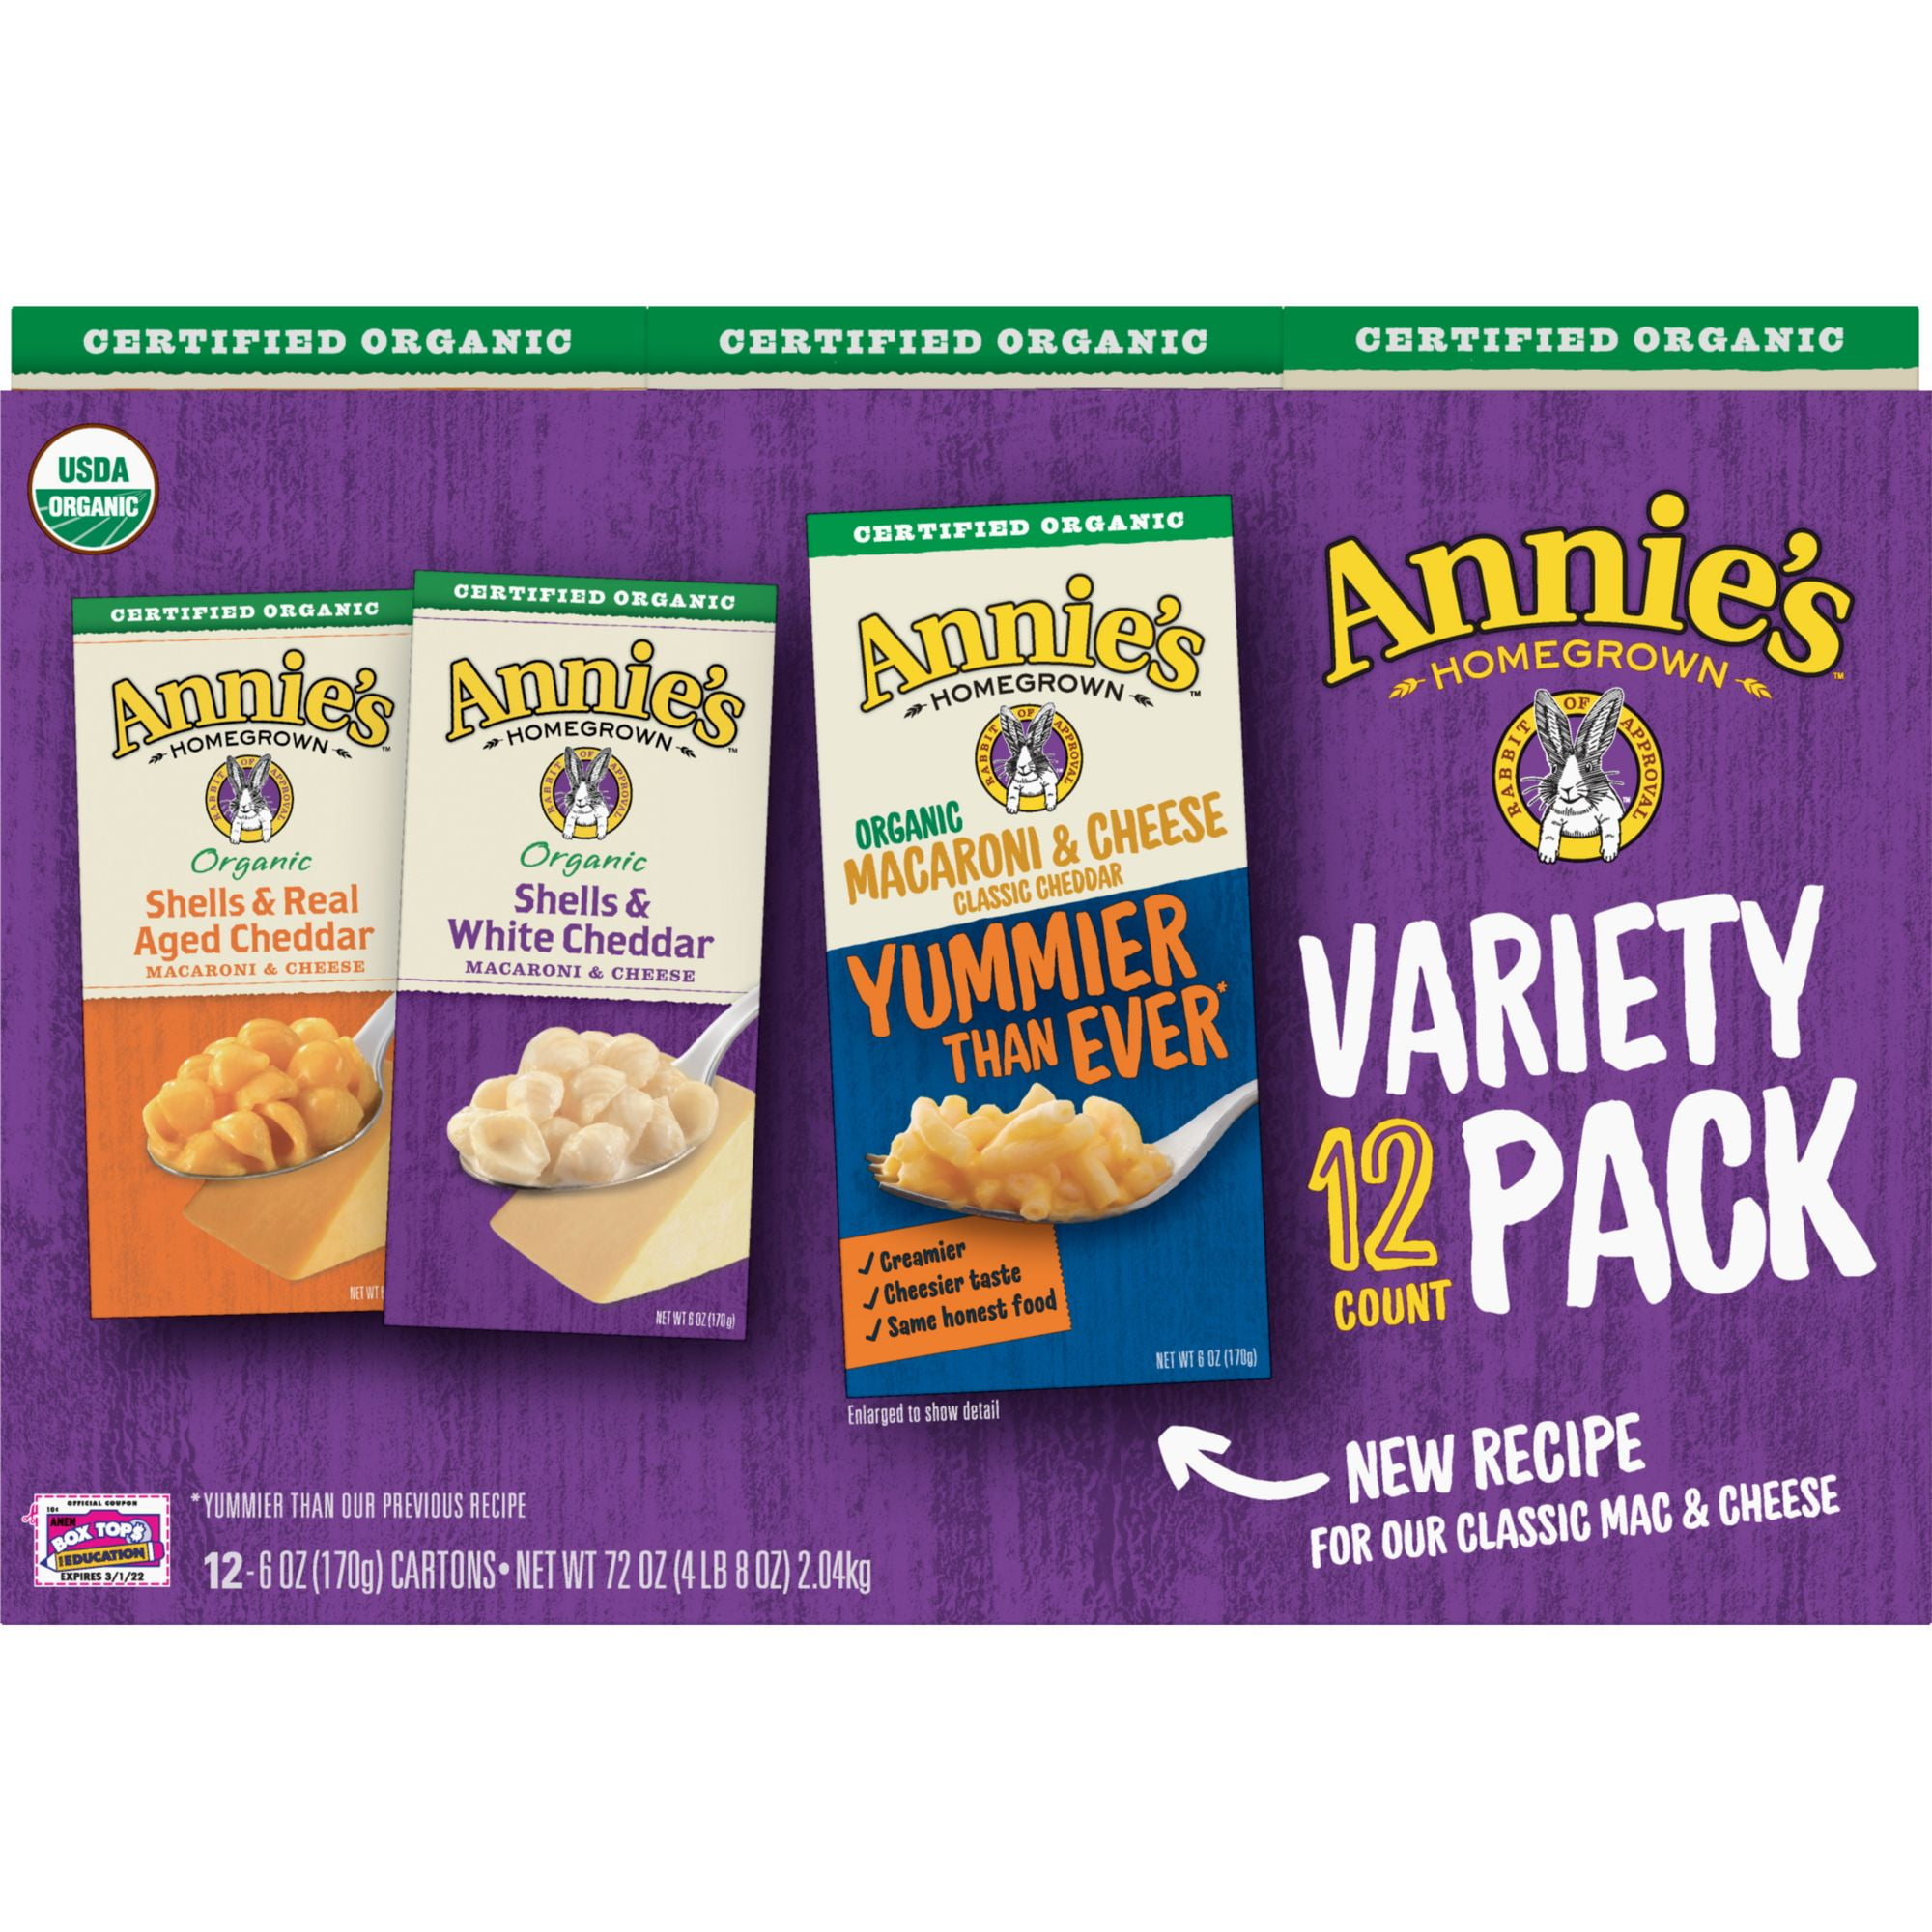 Annies Homegrown Macaroni And Cheese Variety Pack 12 Count. 6 oz